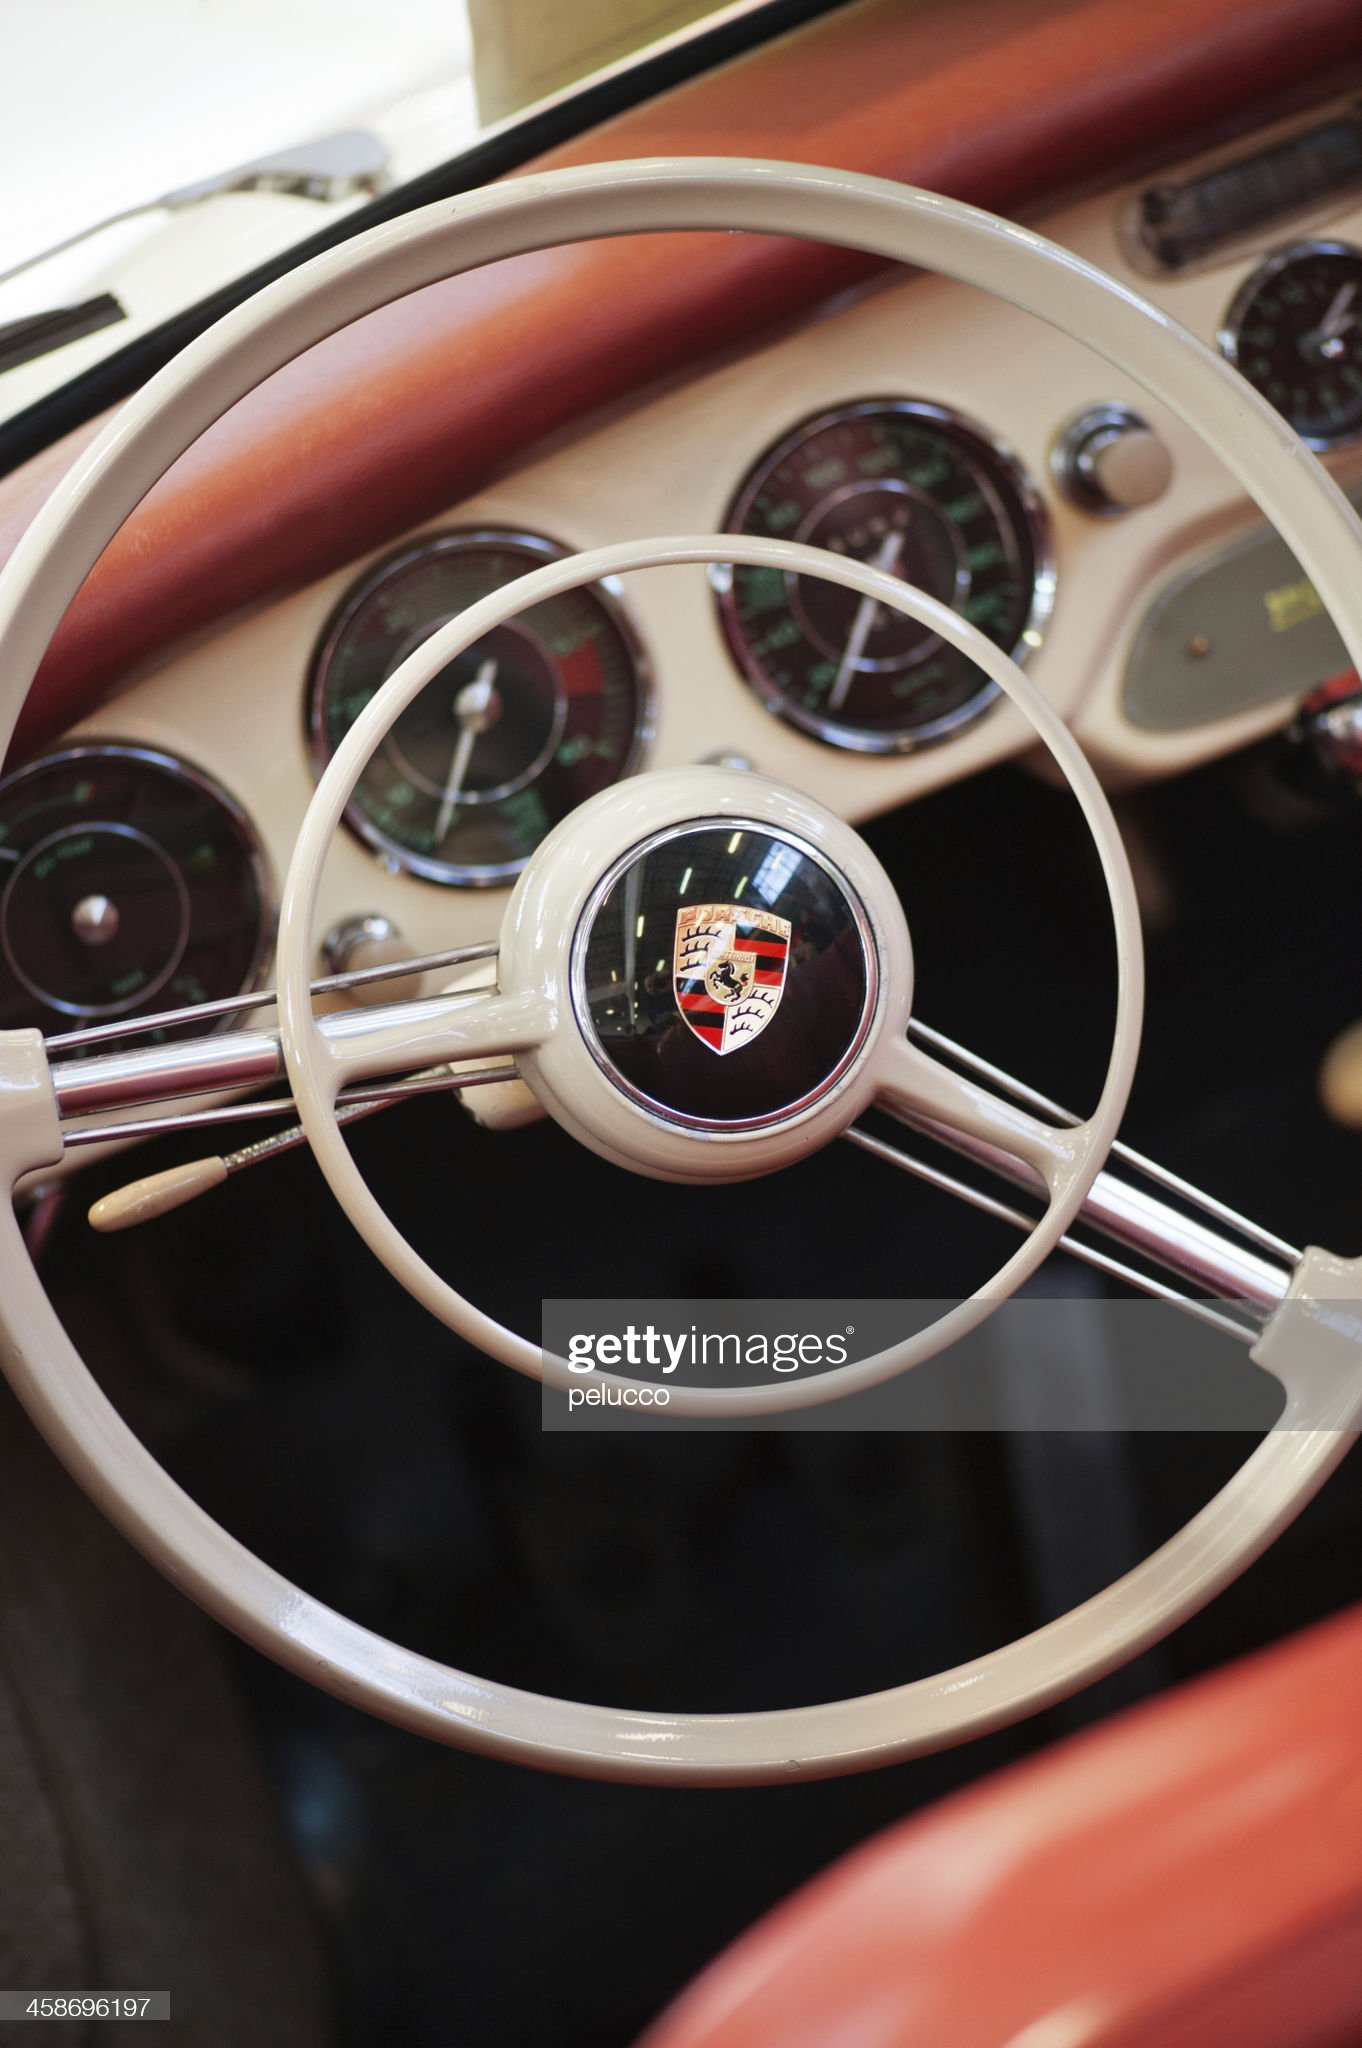 Steering wheel and dashboard of a Porsche Type 356.